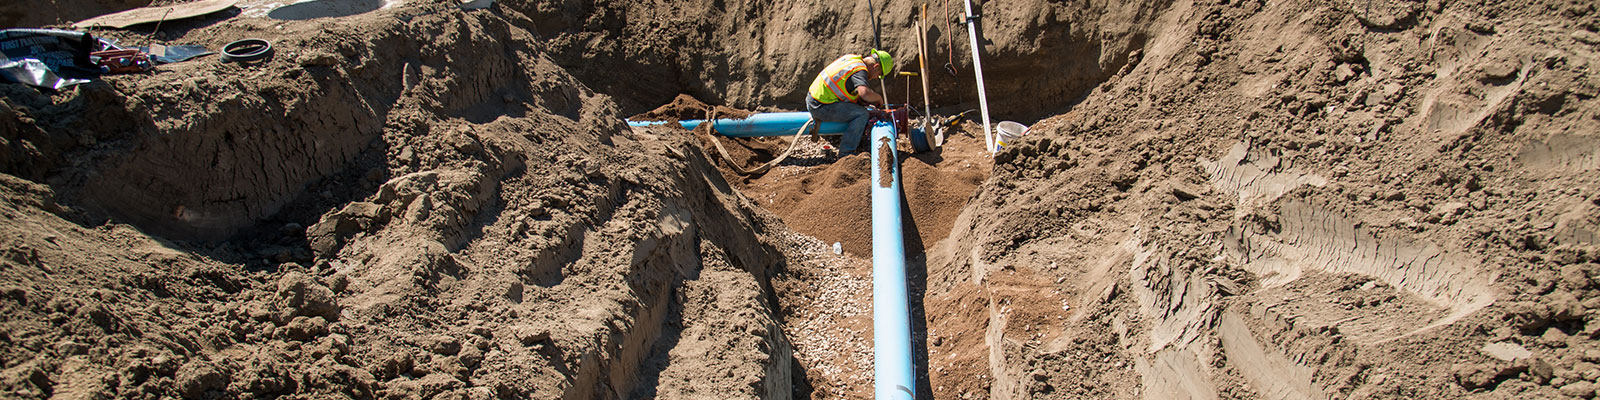 Water pipes being installed as part of a Minot construction job